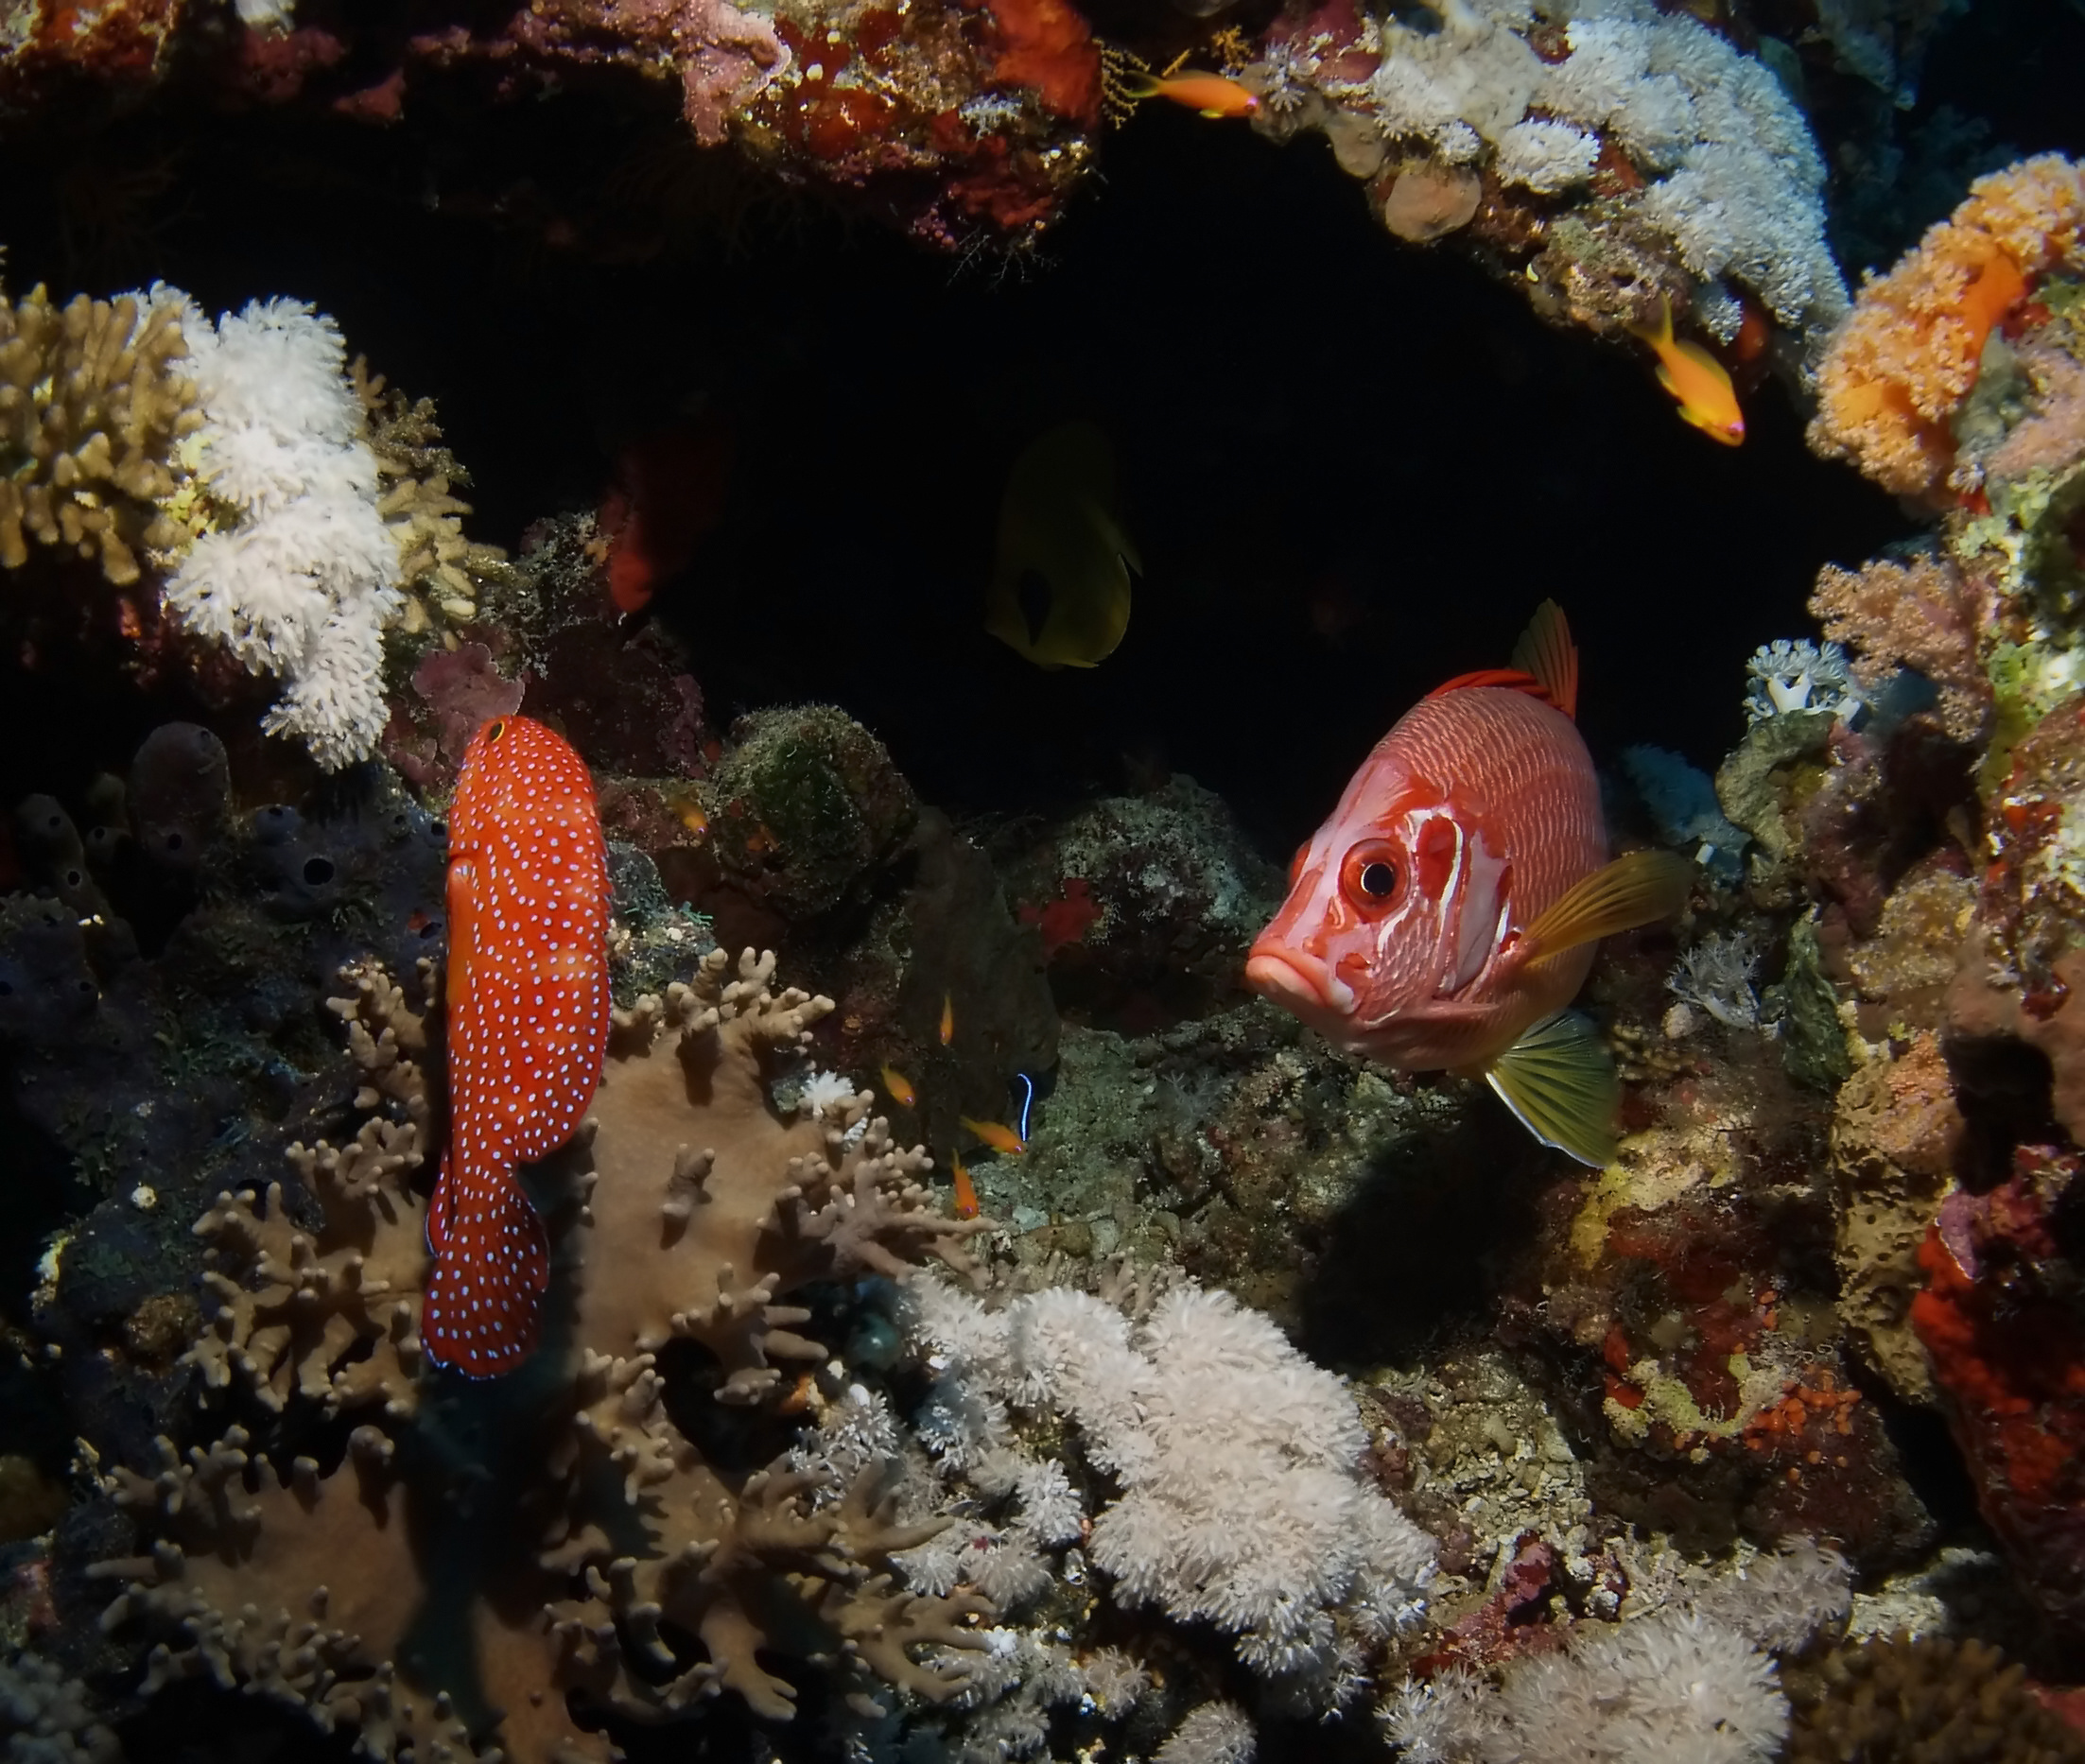 Bright red squirrelfish mix in among the other fishy inhabitants at the Wan-nai dive site in Izu Peninsula, Japan